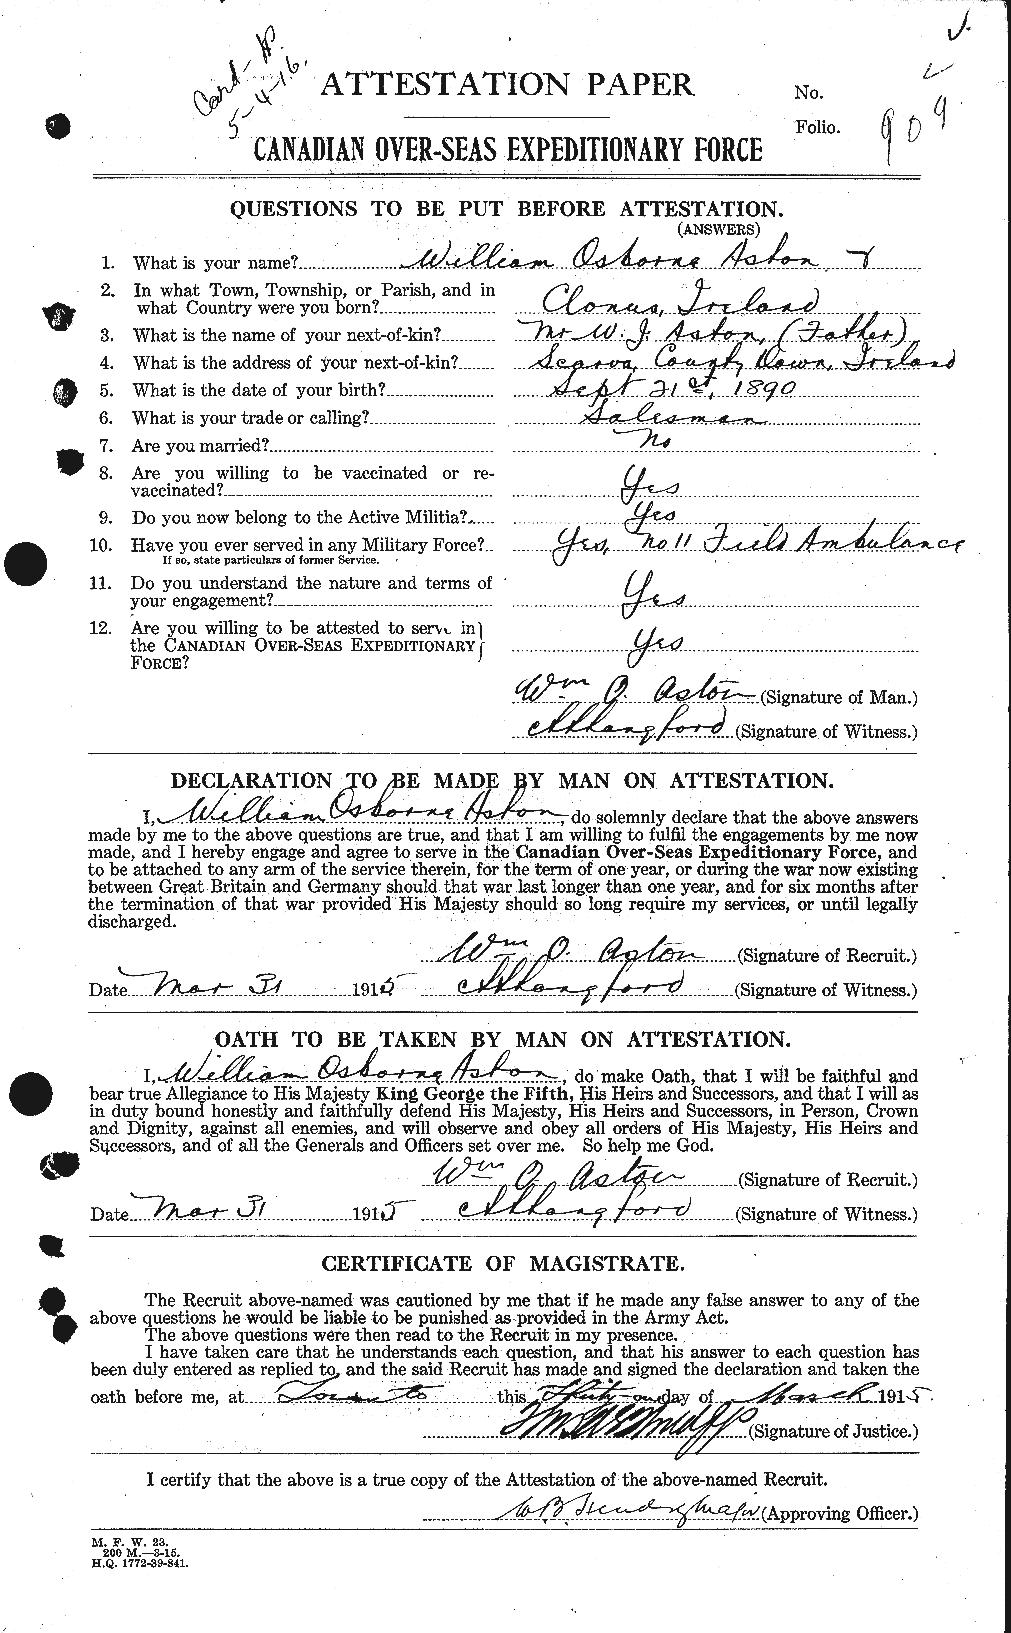 Personnel Records of the First World War - CEF 217083a